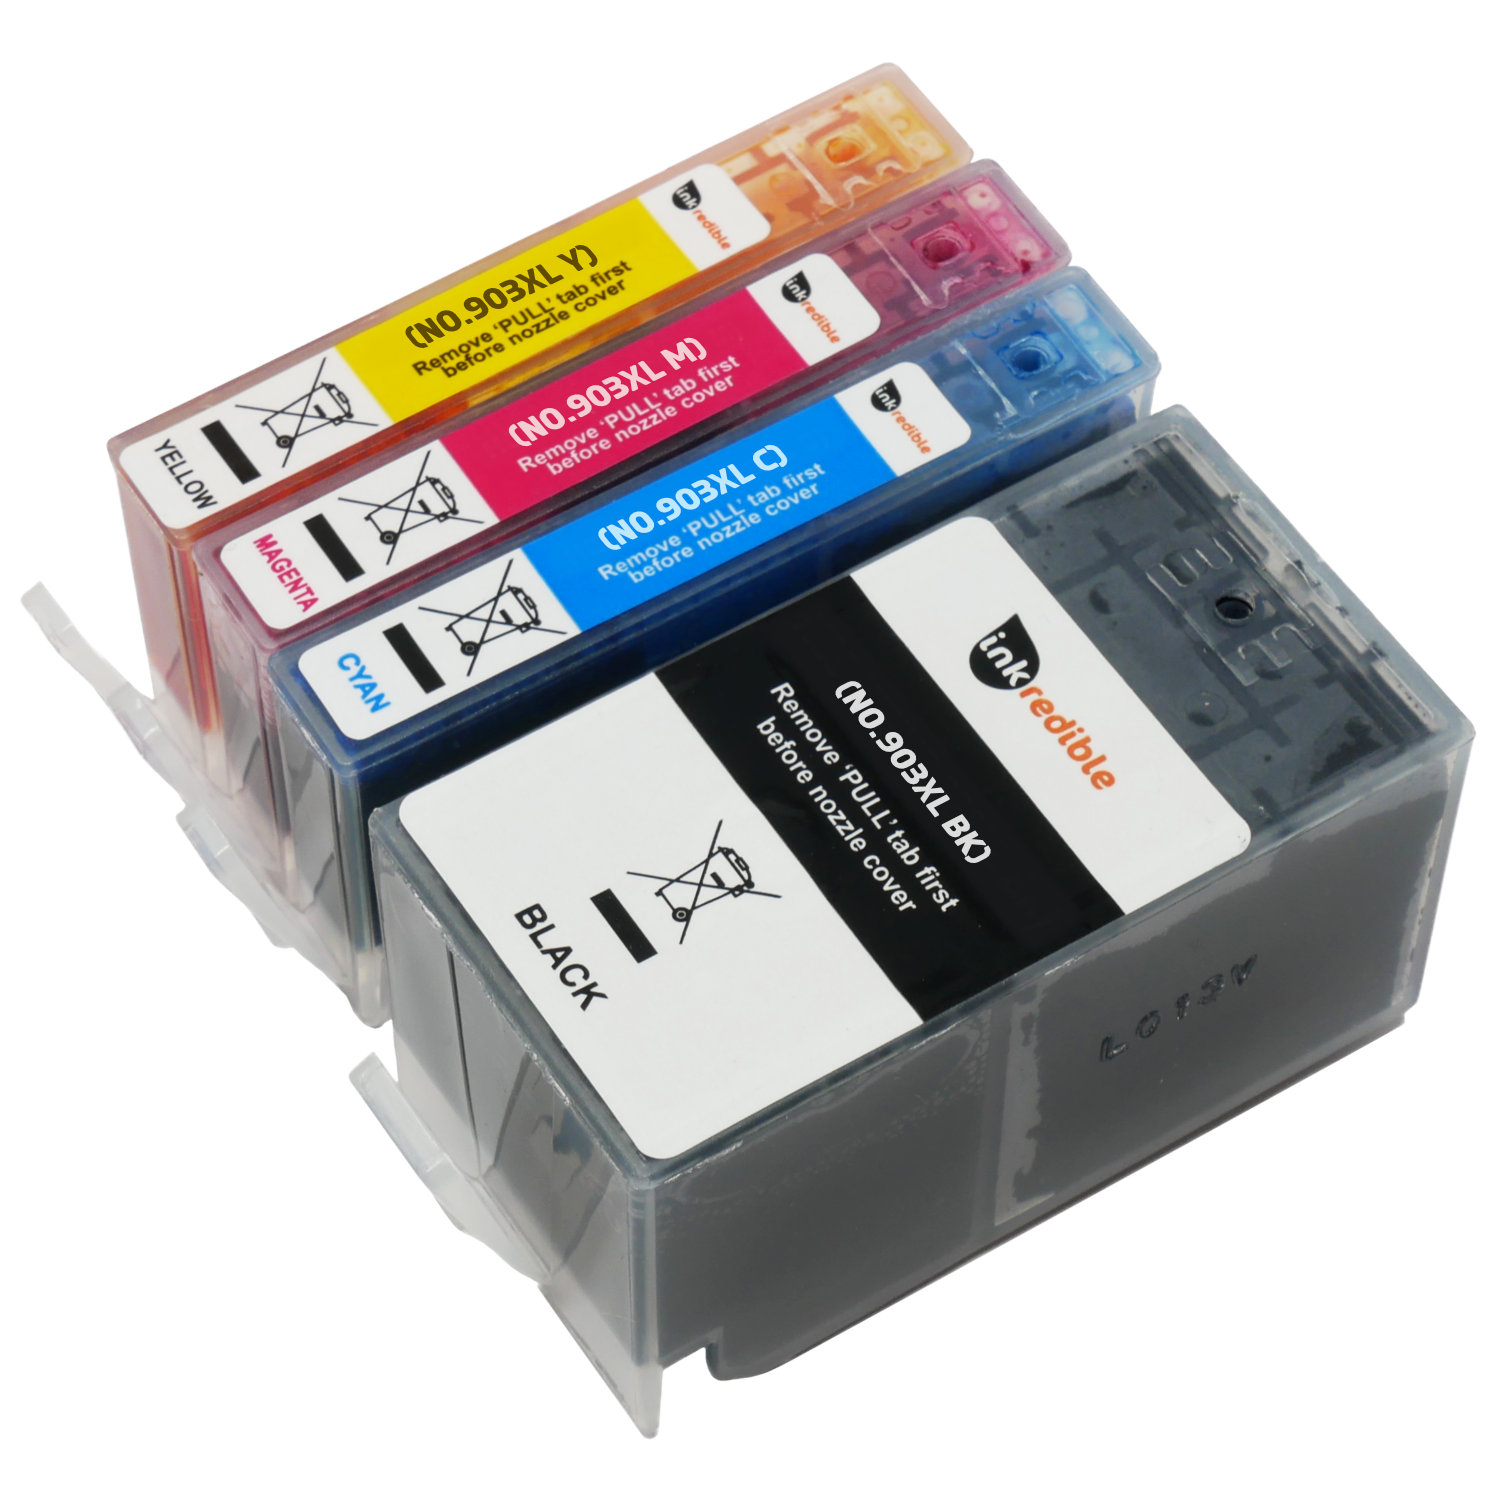 https://www.inkredible.co.uk/images/thumbs/010/0100809_compatible-hp-officejet-6950-all-in-one-multipack-ink-cartridges-7a217883-e847-4594-a169-fbeeb8c5db8.png